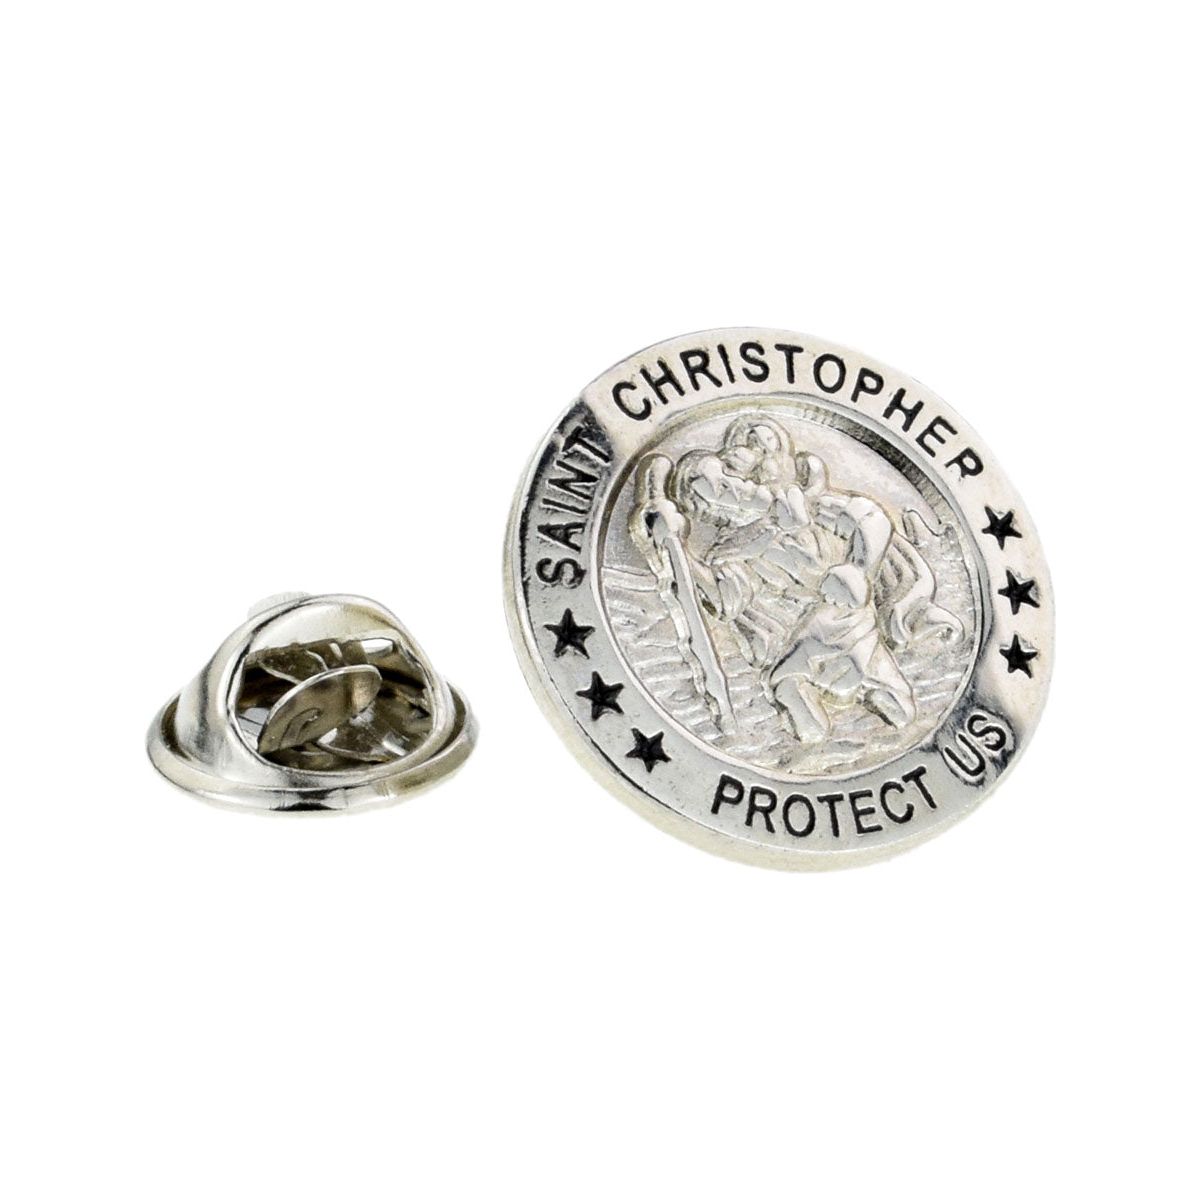 Good Luck Good Fortune Travellers ST CHRISTOPHER Lapel Pin Badge - Ashton and Finch